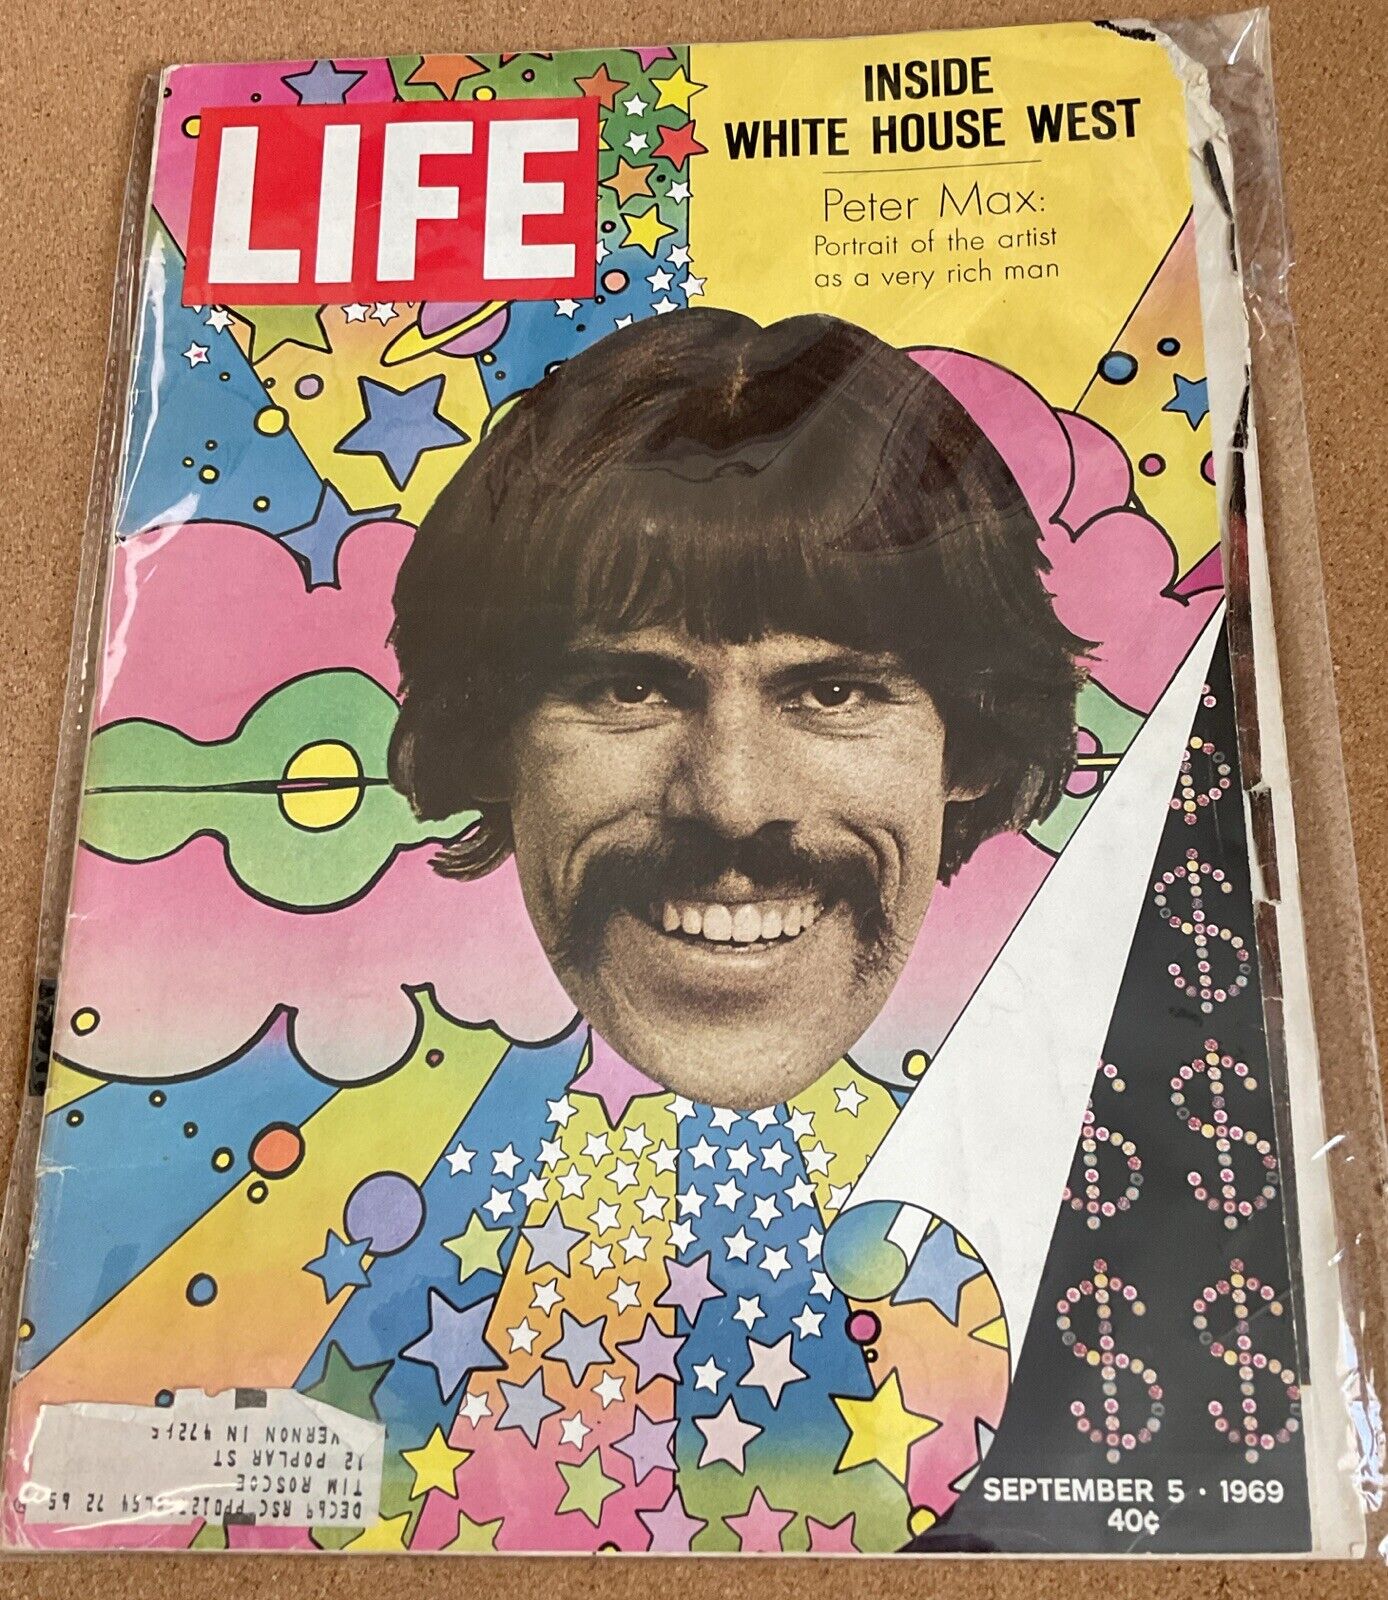 Life Magazine Cover Only Original Rare Vtg 1960s Peter Max Art Psychedelic Pop